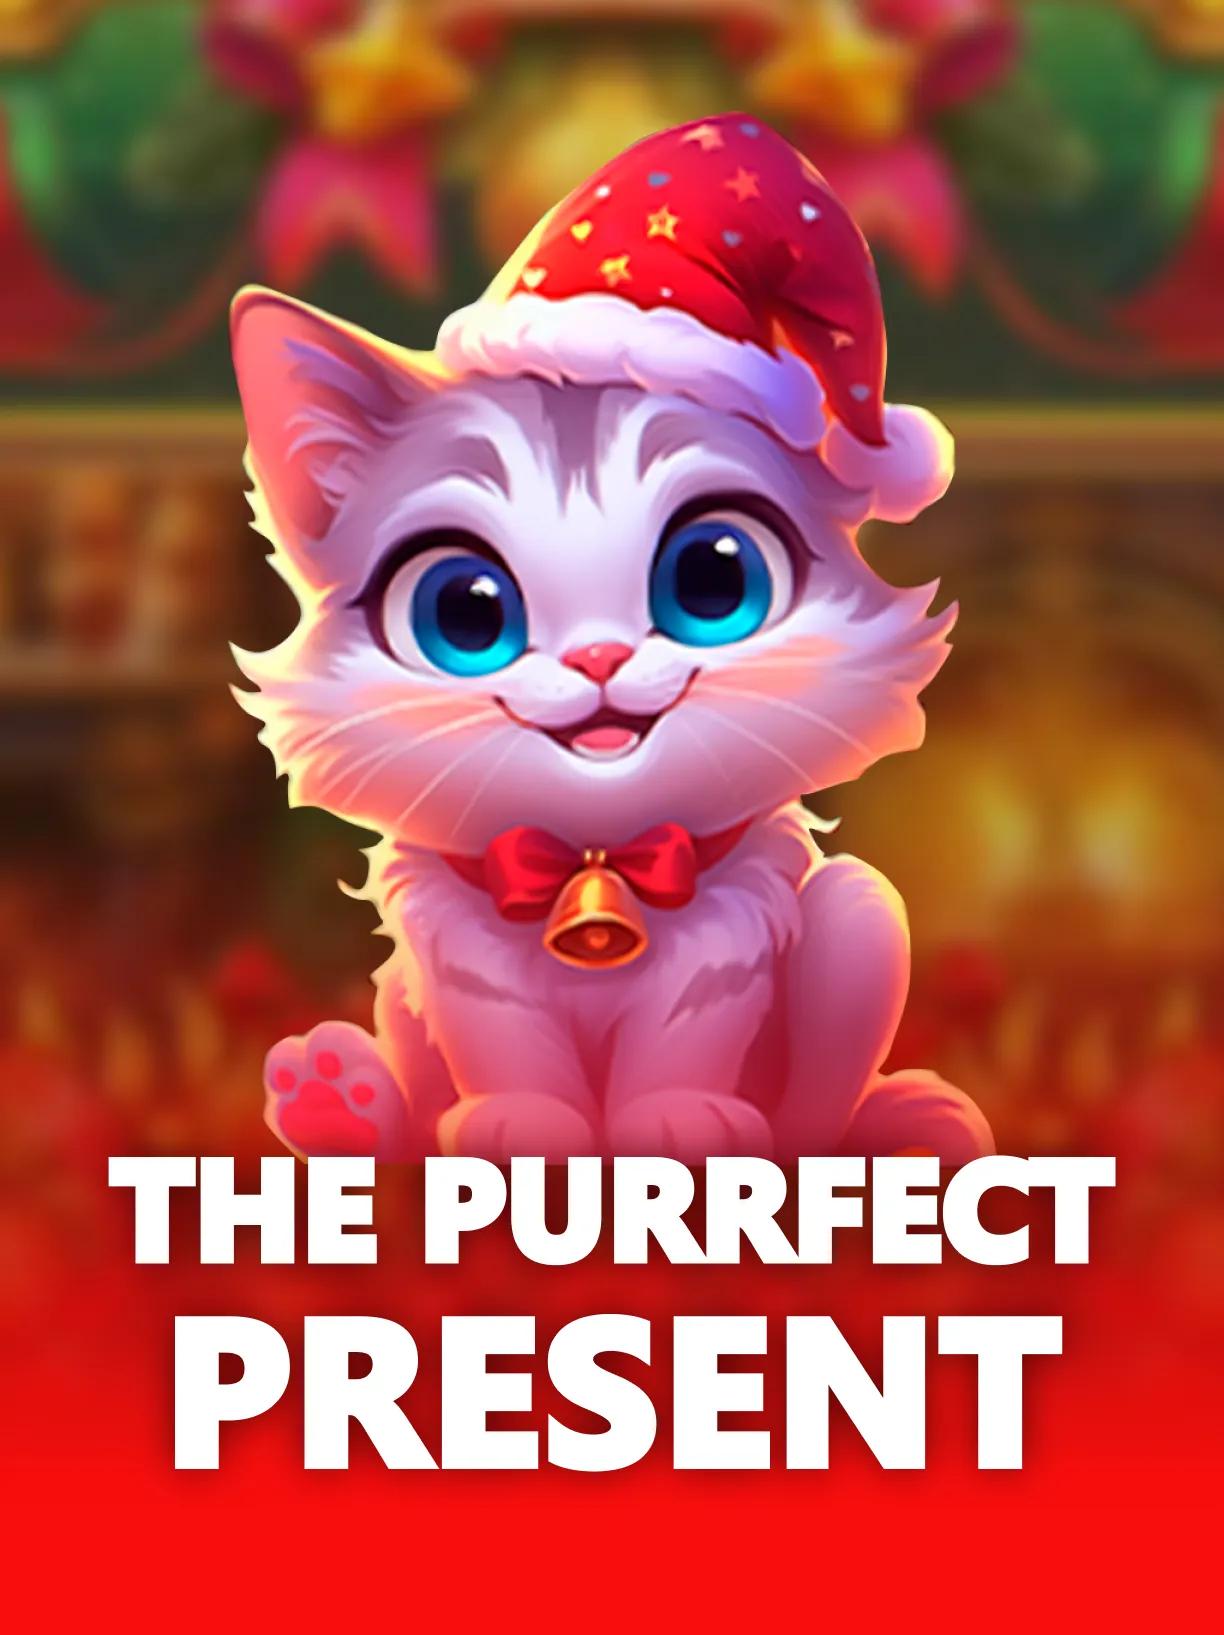 ug_The_Purrfect_Present_square.webp